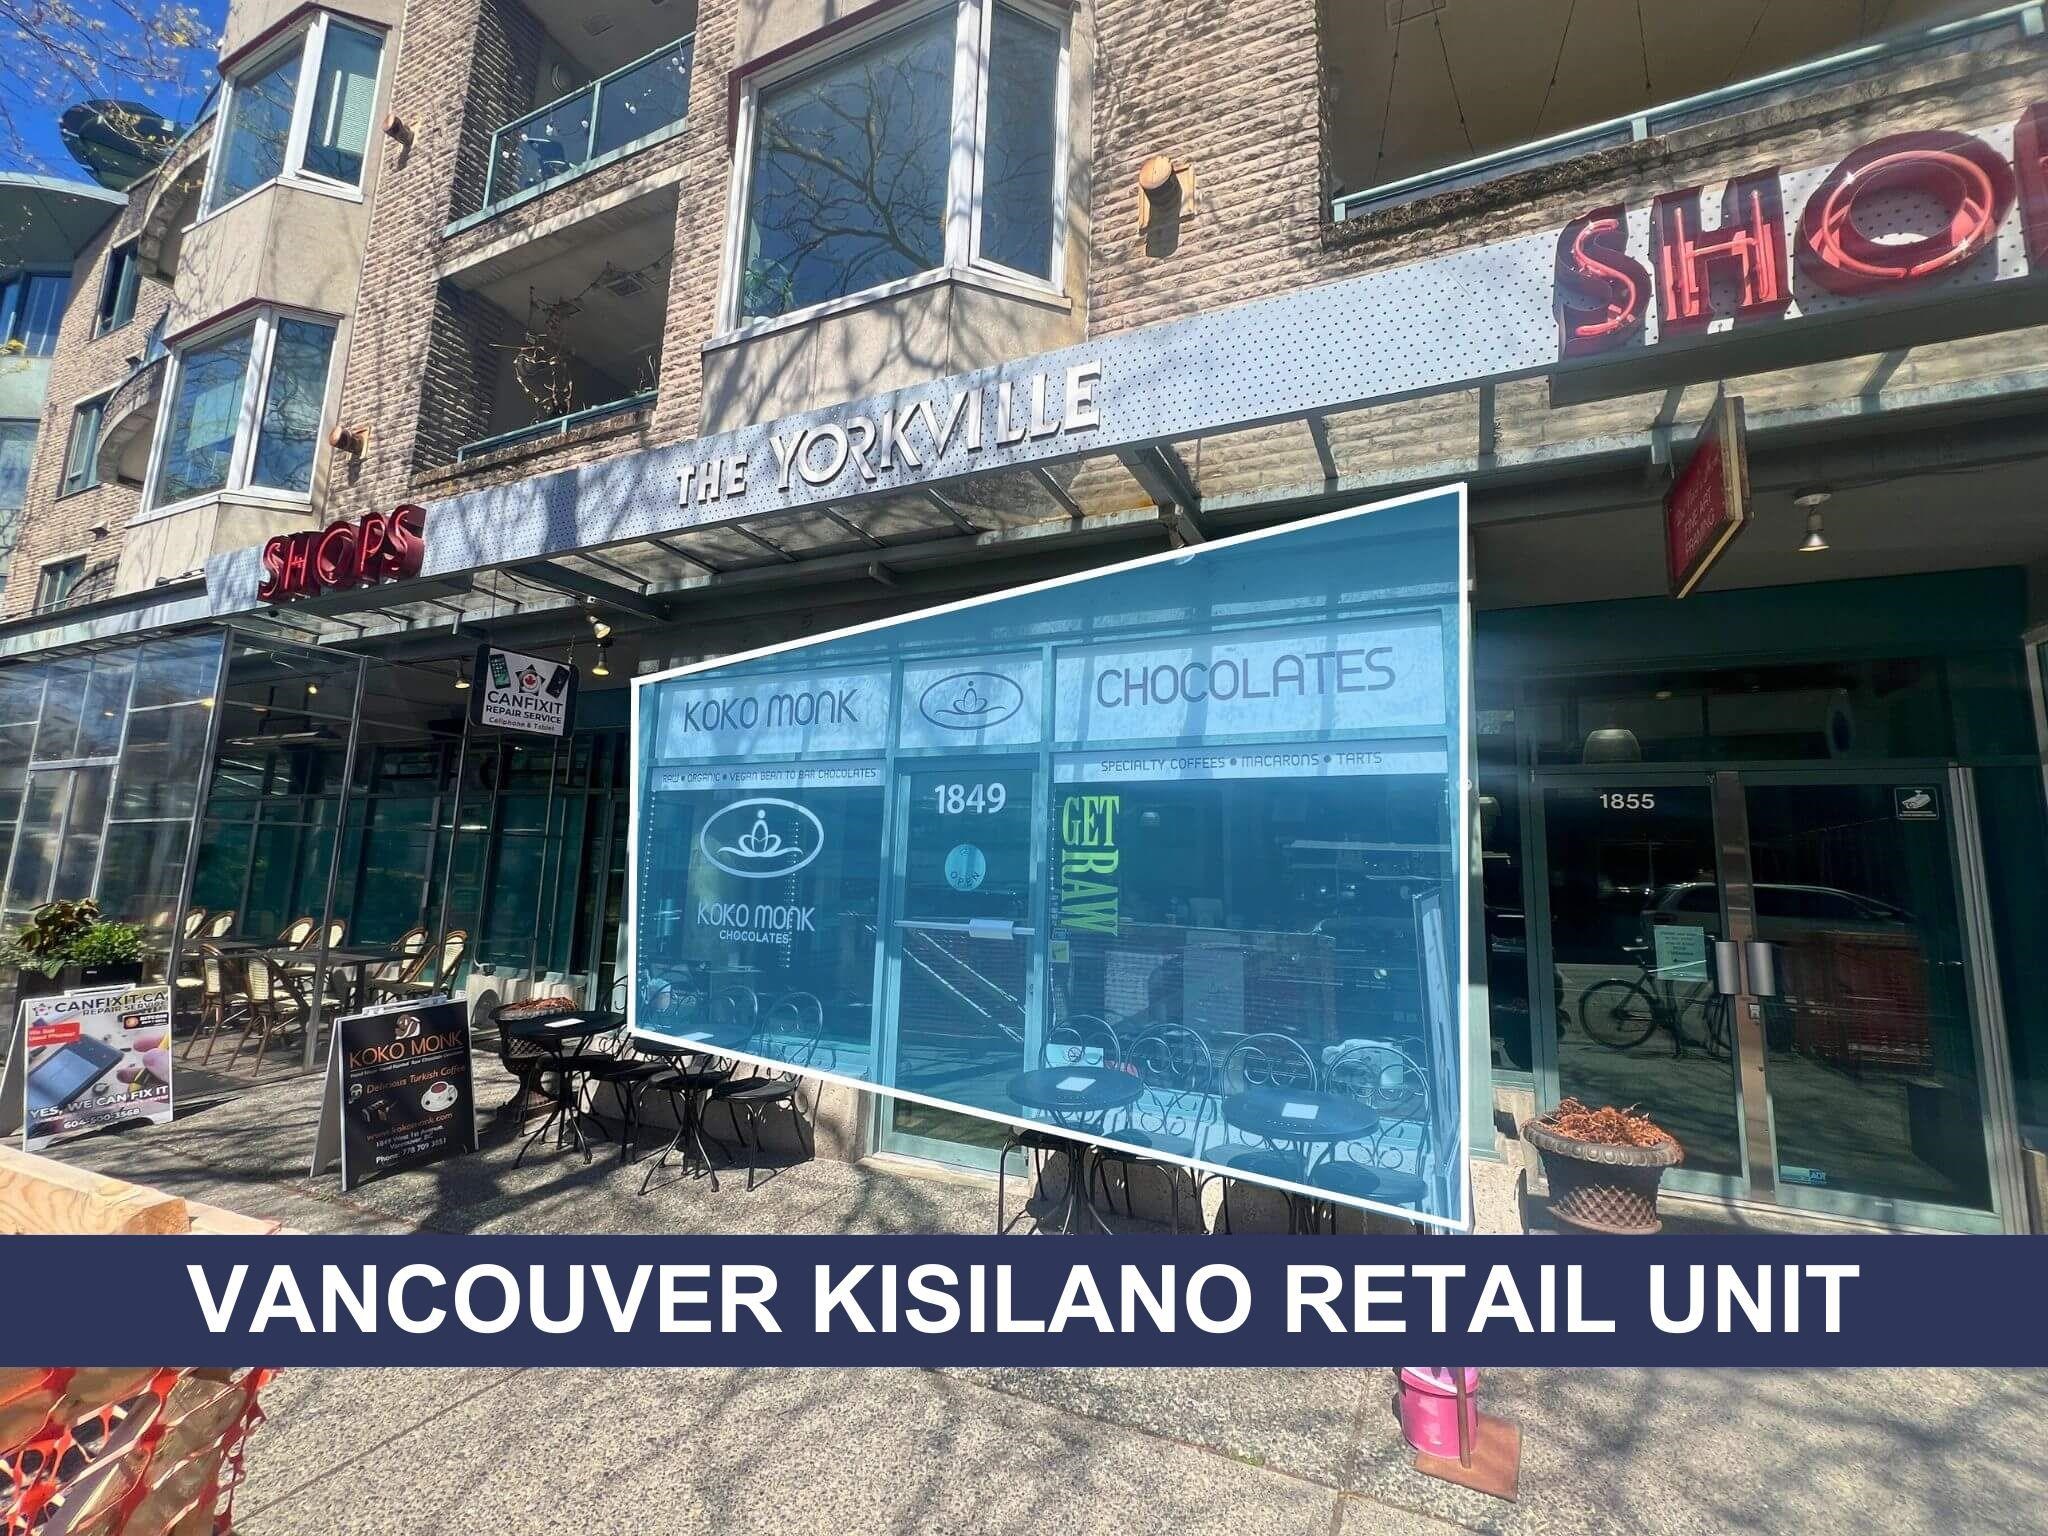 Kitsilano Land Commercial for sale:    (Listed 6800-05-10)